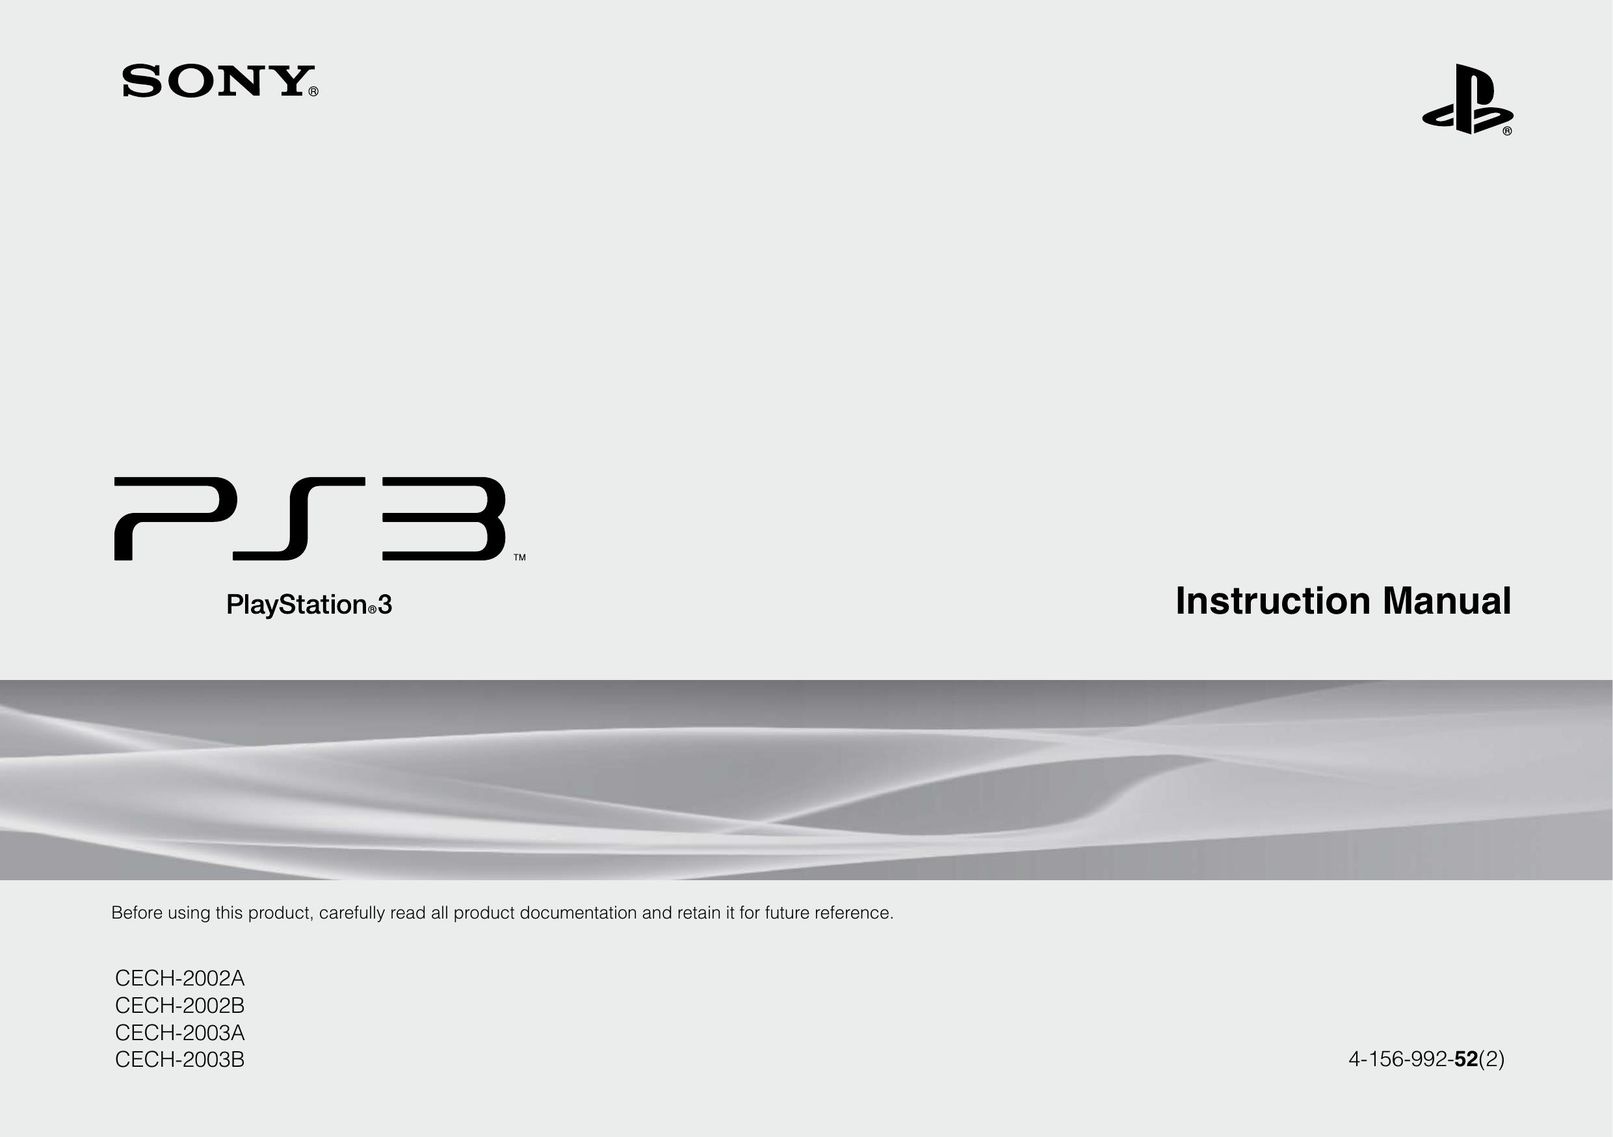 Sony CECH-2002B Video Game Console User Manual